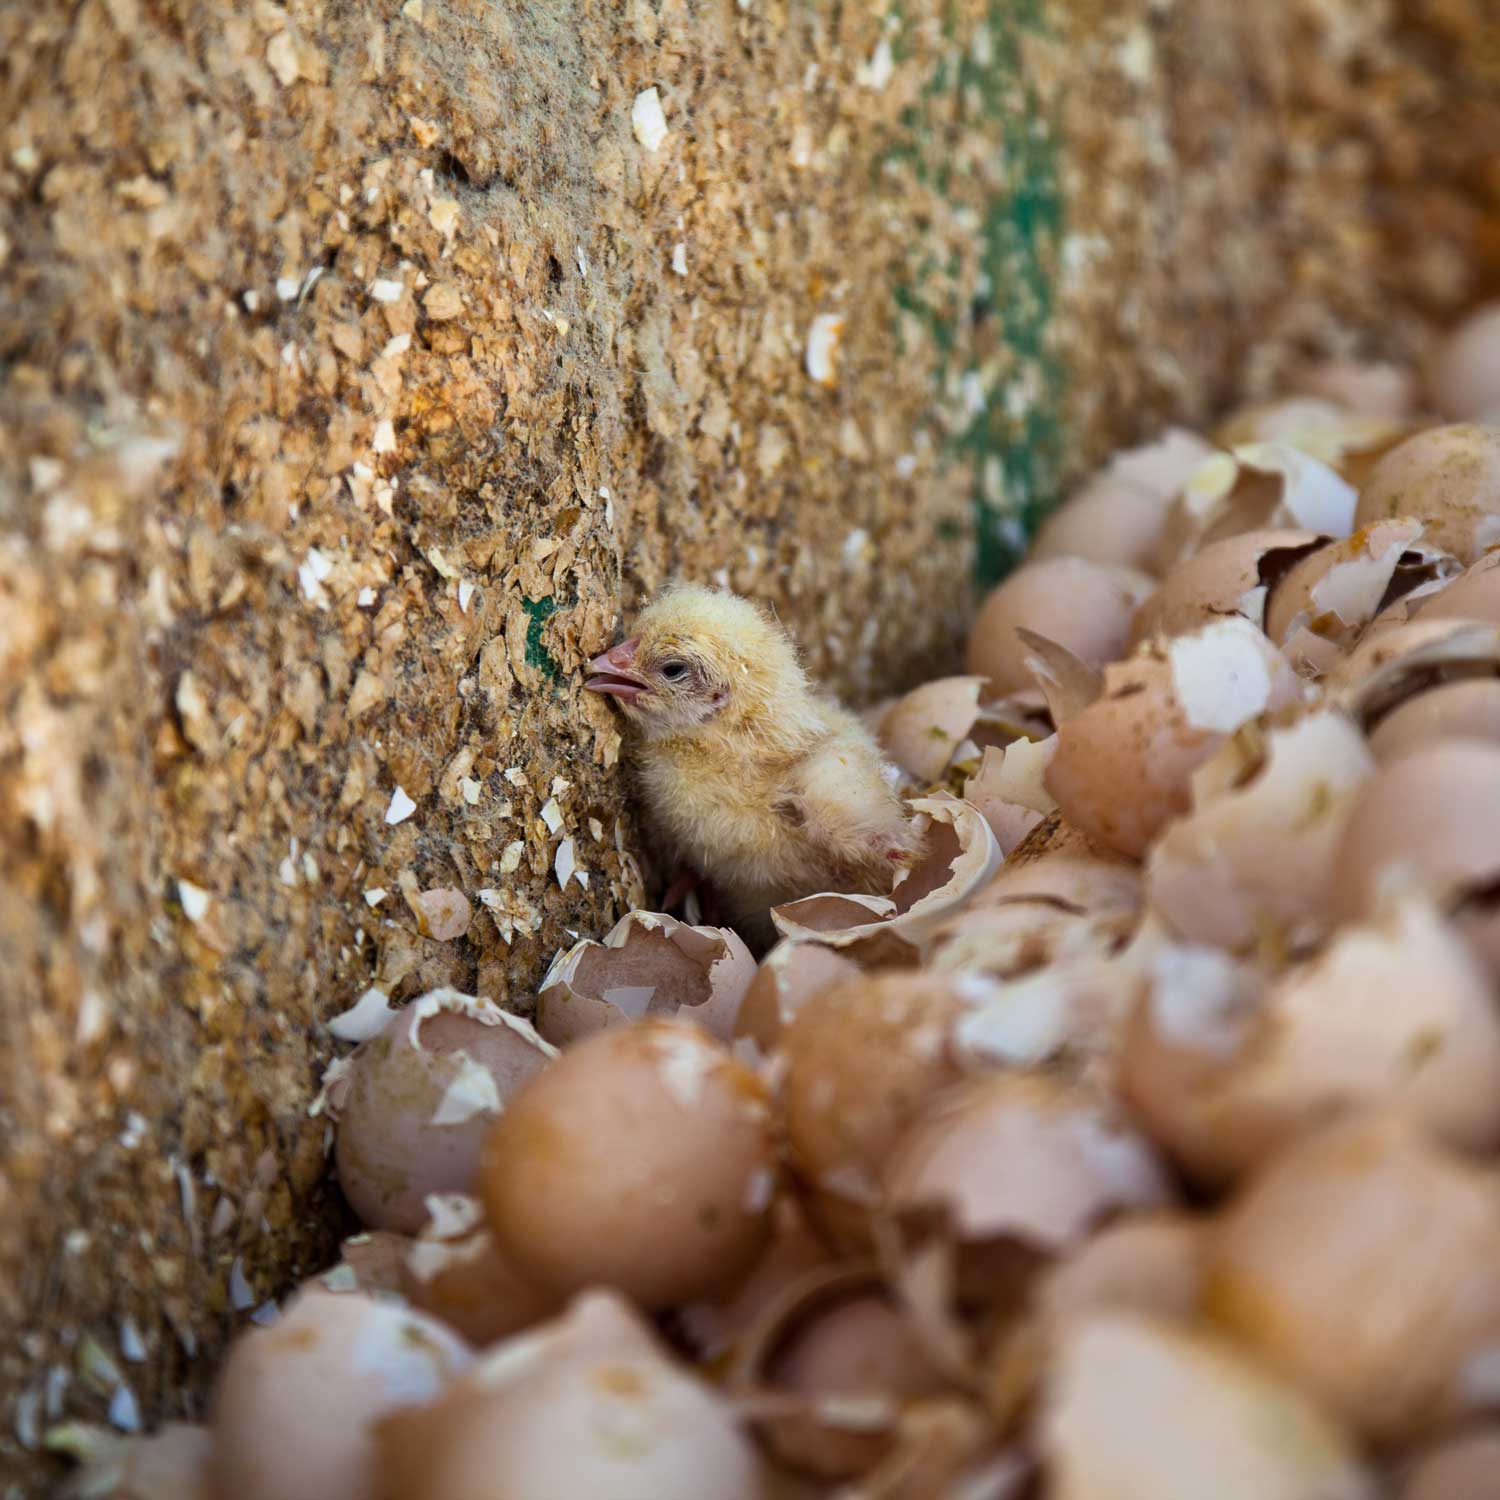 Baby chick against wall with hatched eggs